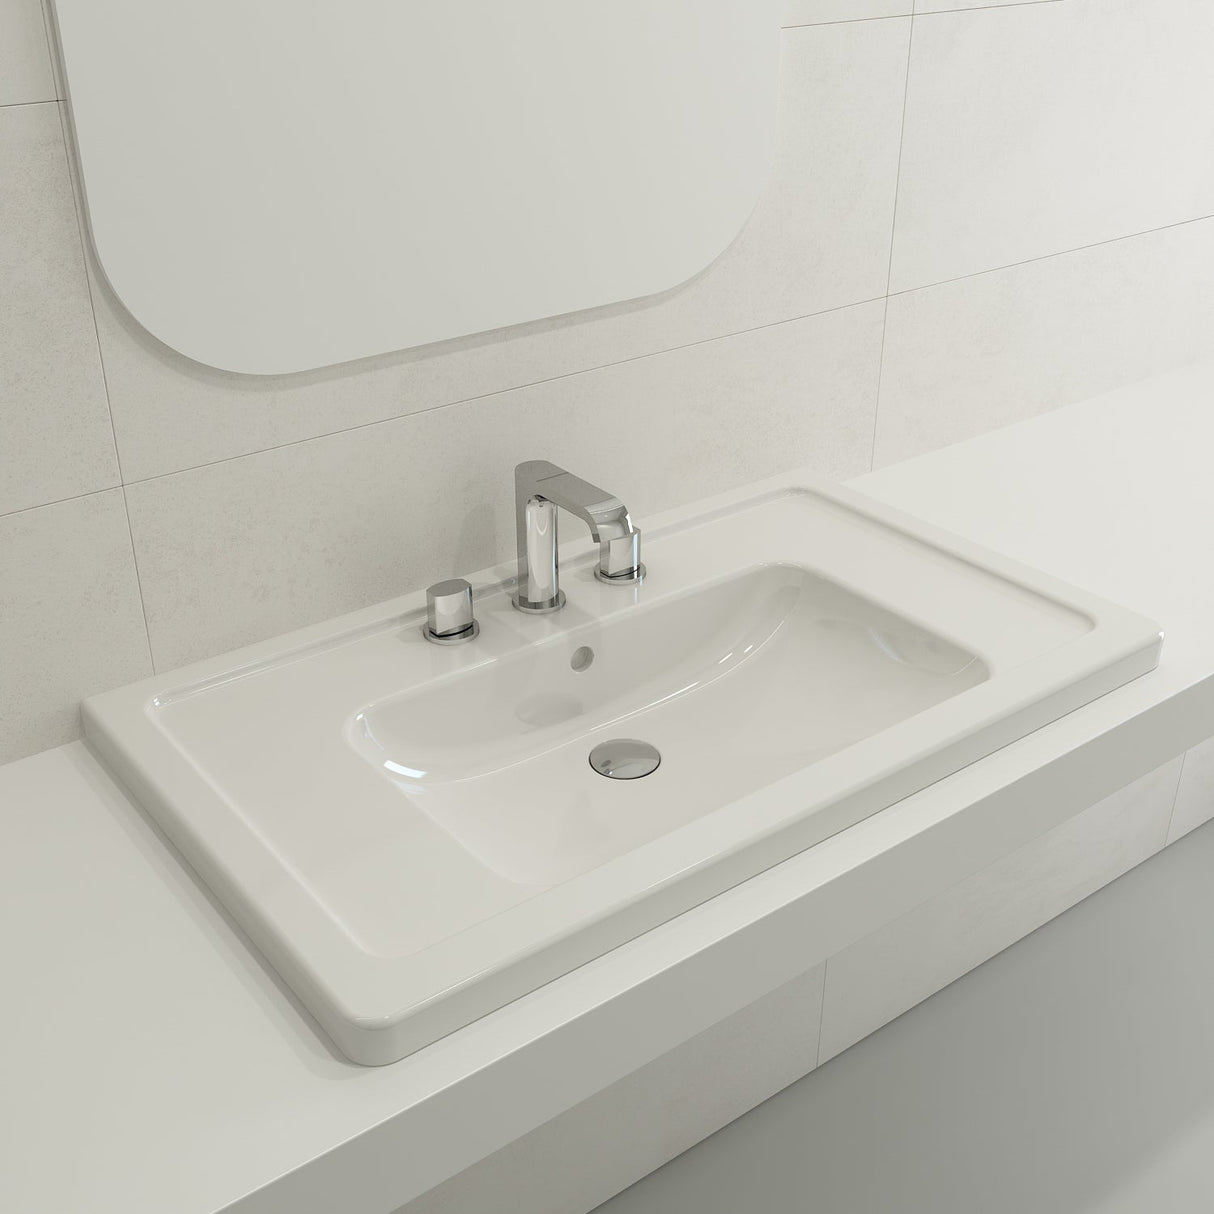 BOCCHI 1008-001-0127 Taormina Wall-Mounted Sink Basin Fireclay 33.75 in. 3-Hole with Overflow in White